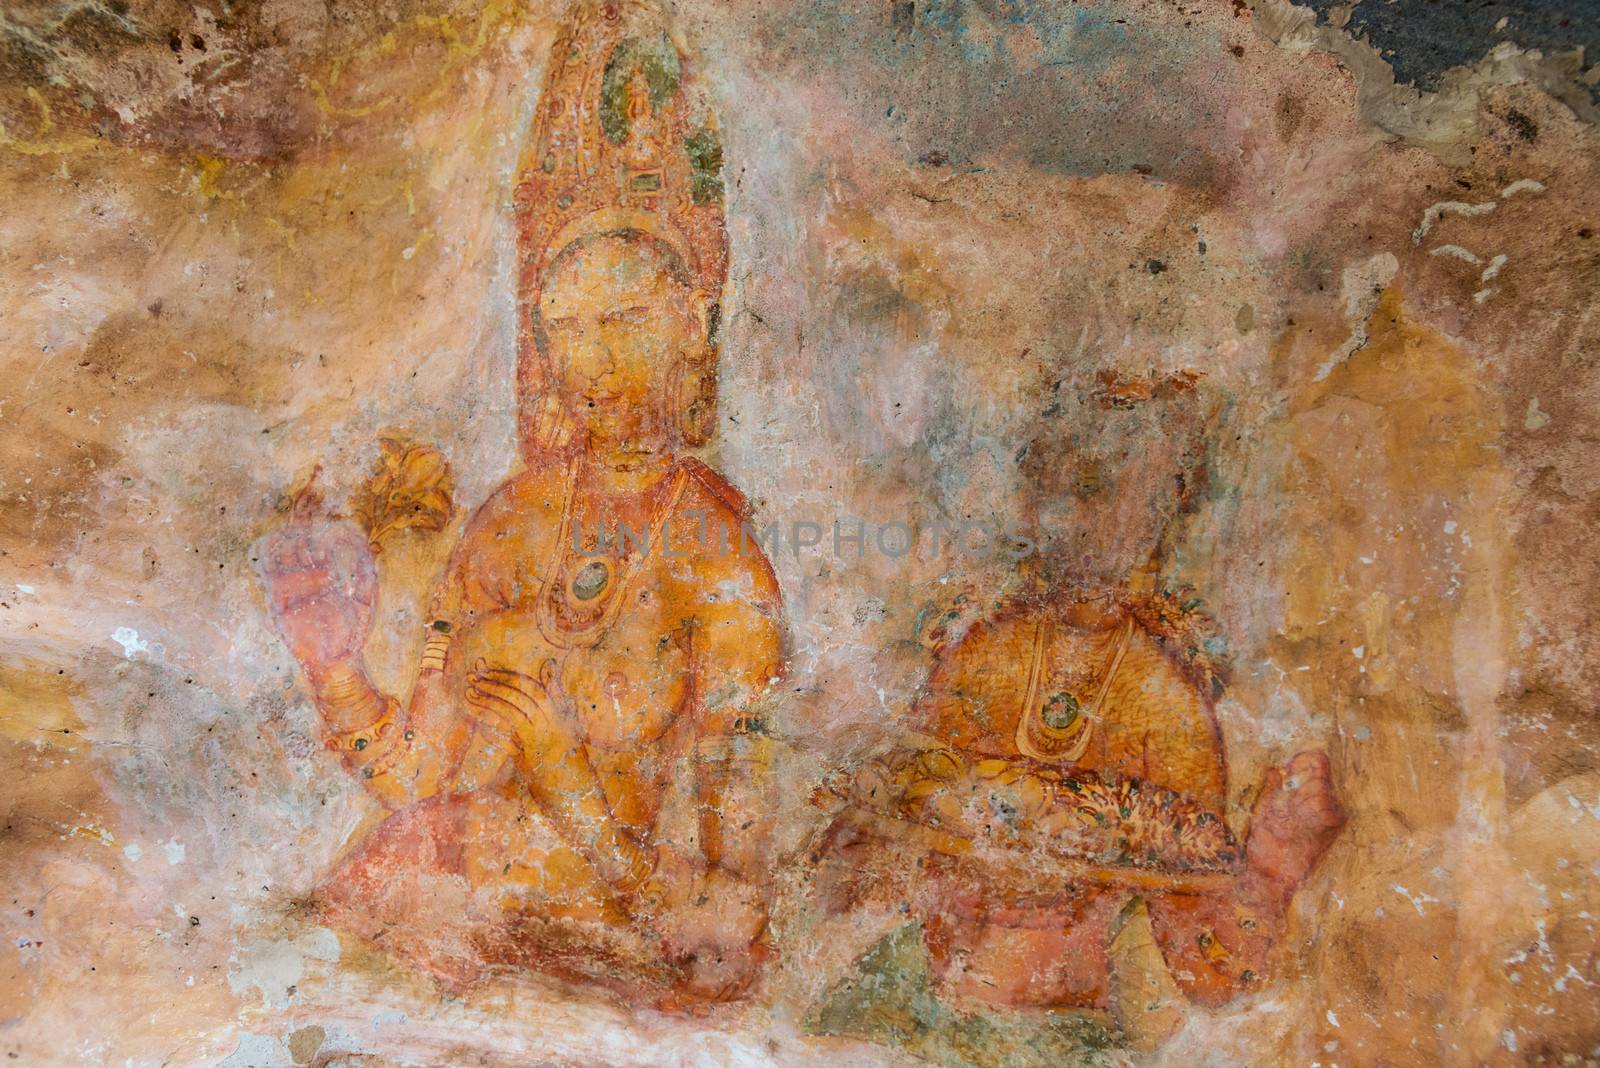 Ancient wall paintings of cloudy maidens. One of the 5th century frescoes at the ancient rock fortress of Sigiriya, Sri Lanka. 